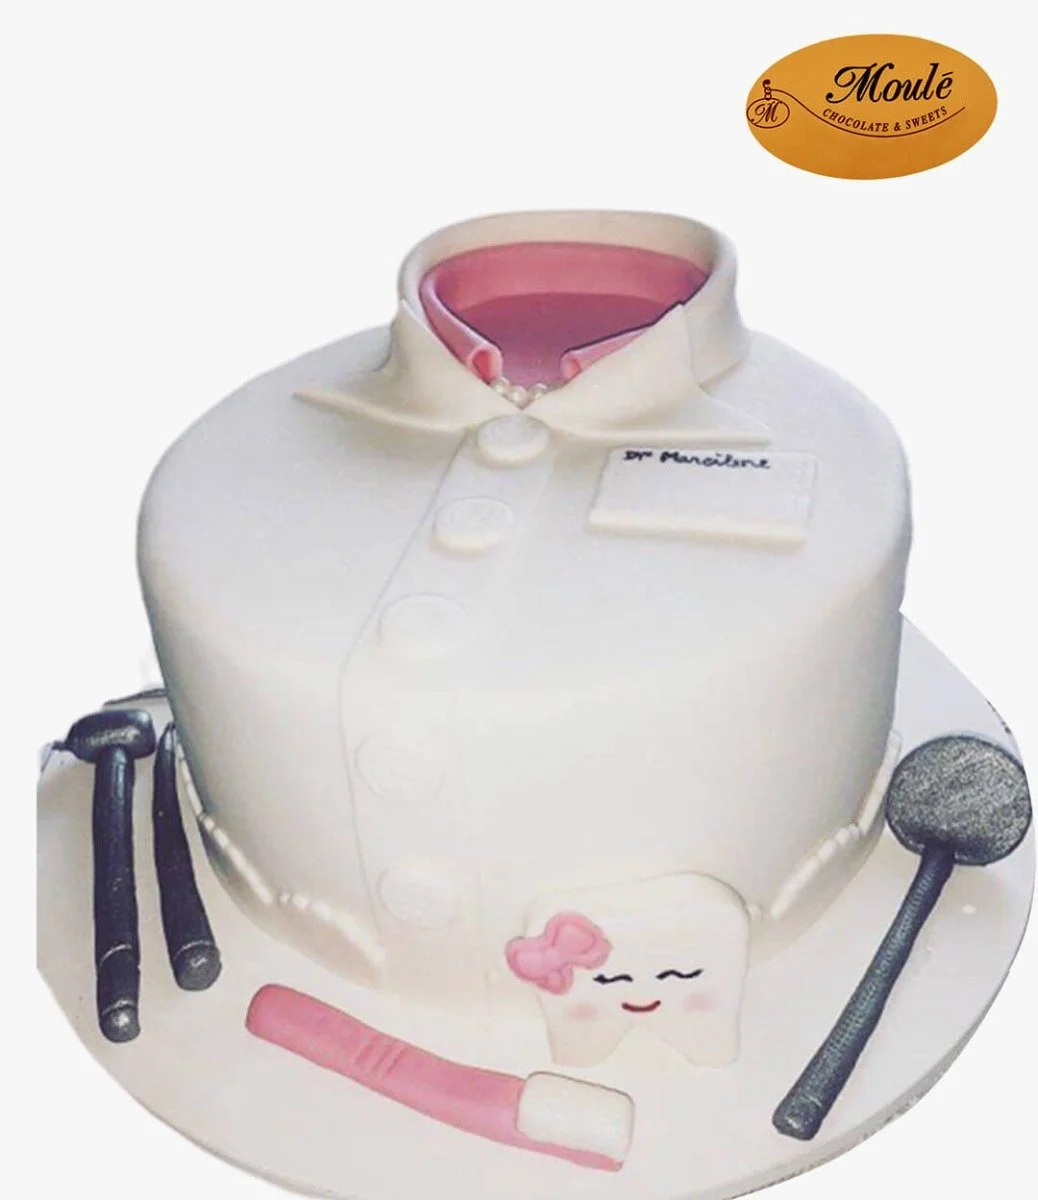 Dentist Cake by Moule Cakes